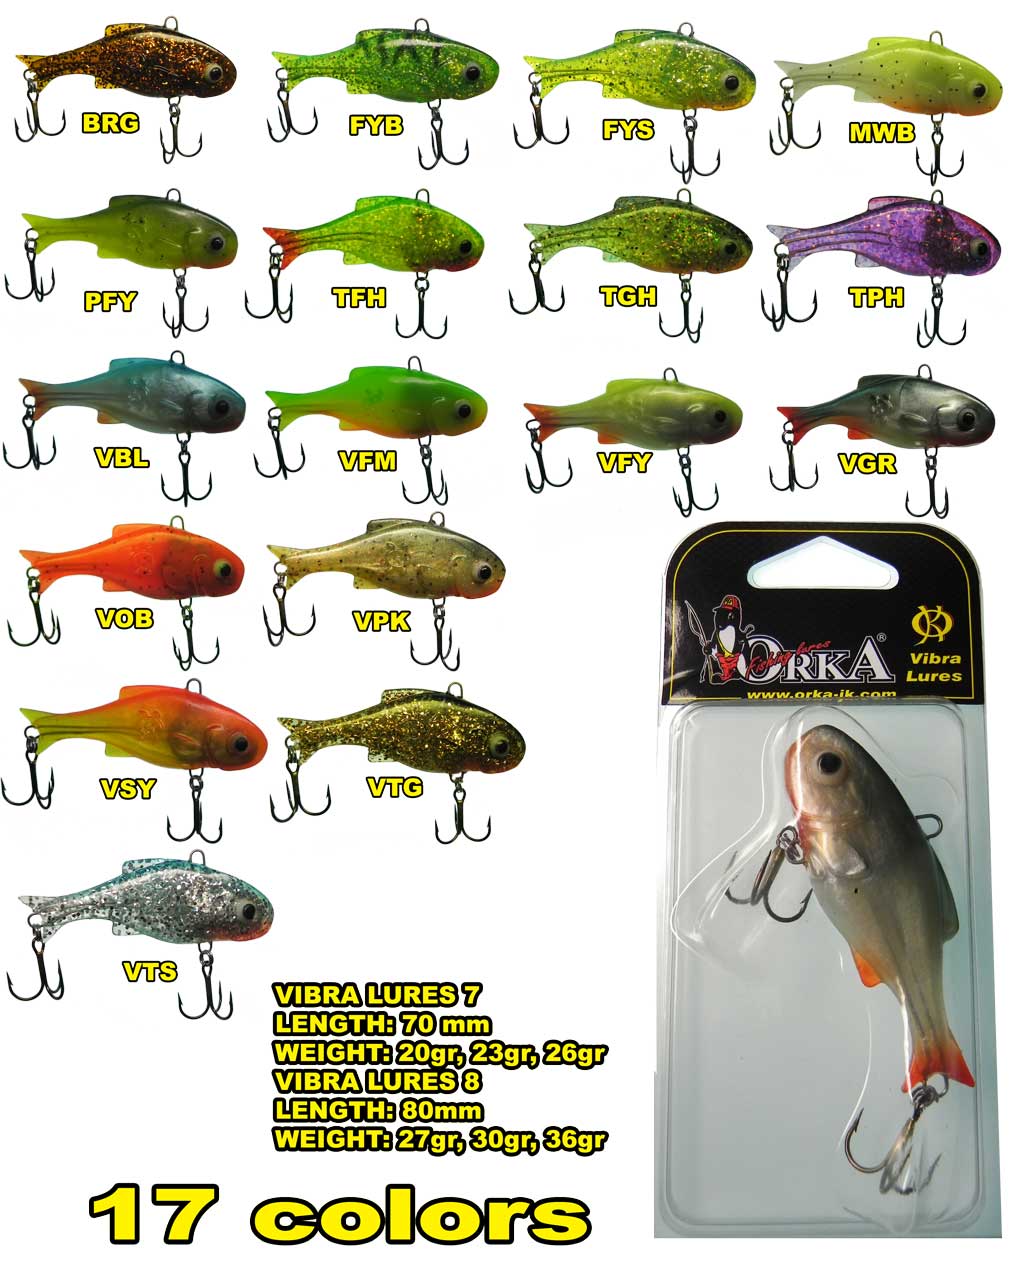 VIBRA LURES-New product in Orka product line